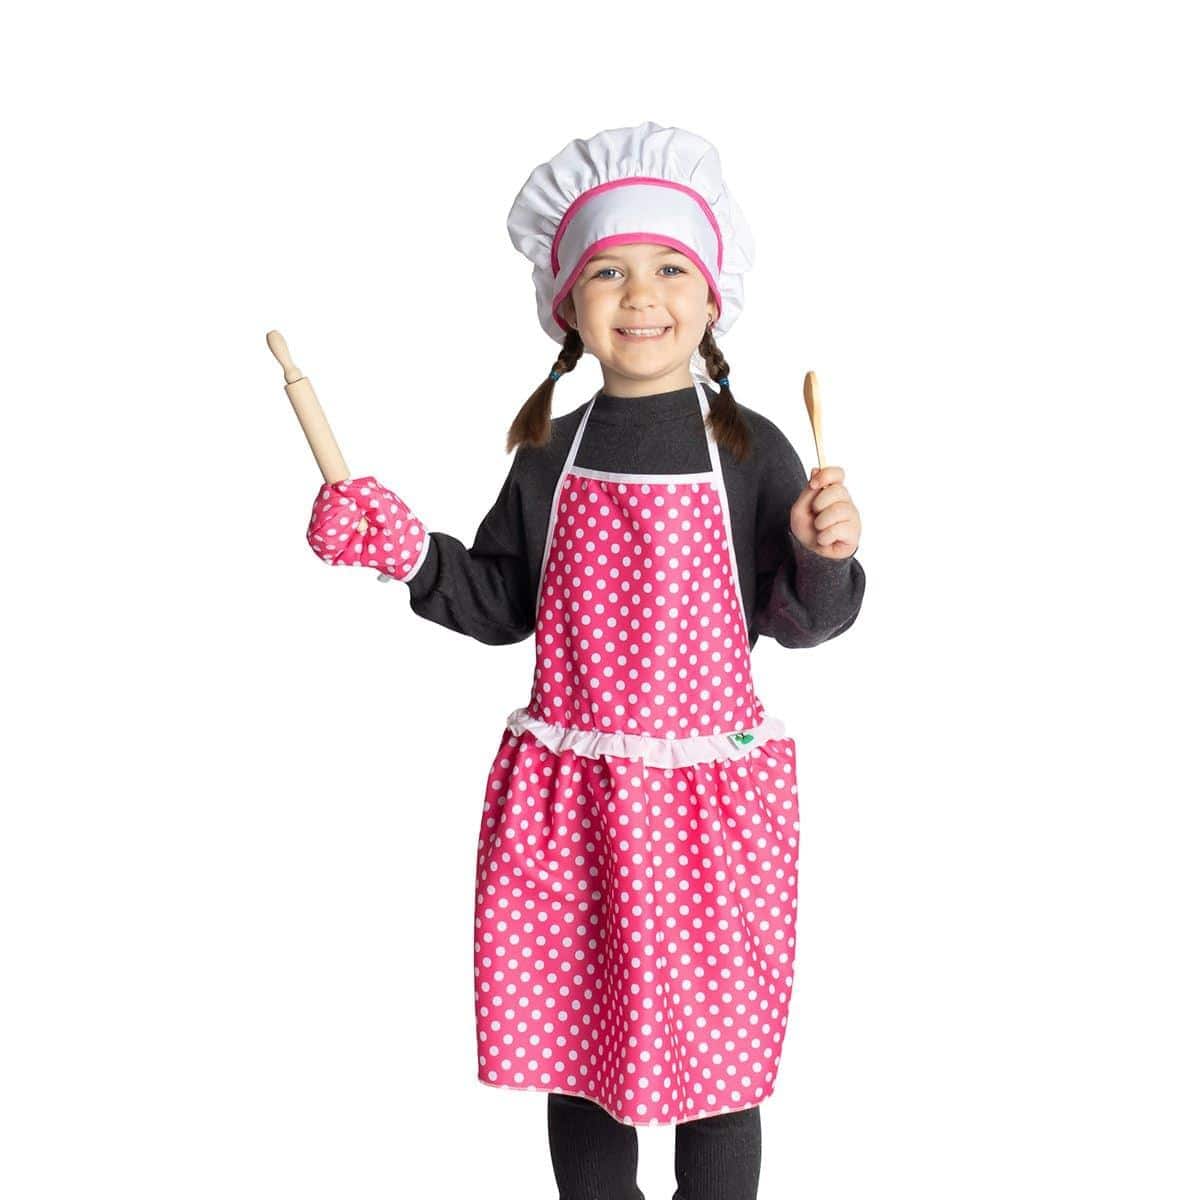 Buy Costumes Pink Baking Play Set for Kids sold at Party Expert